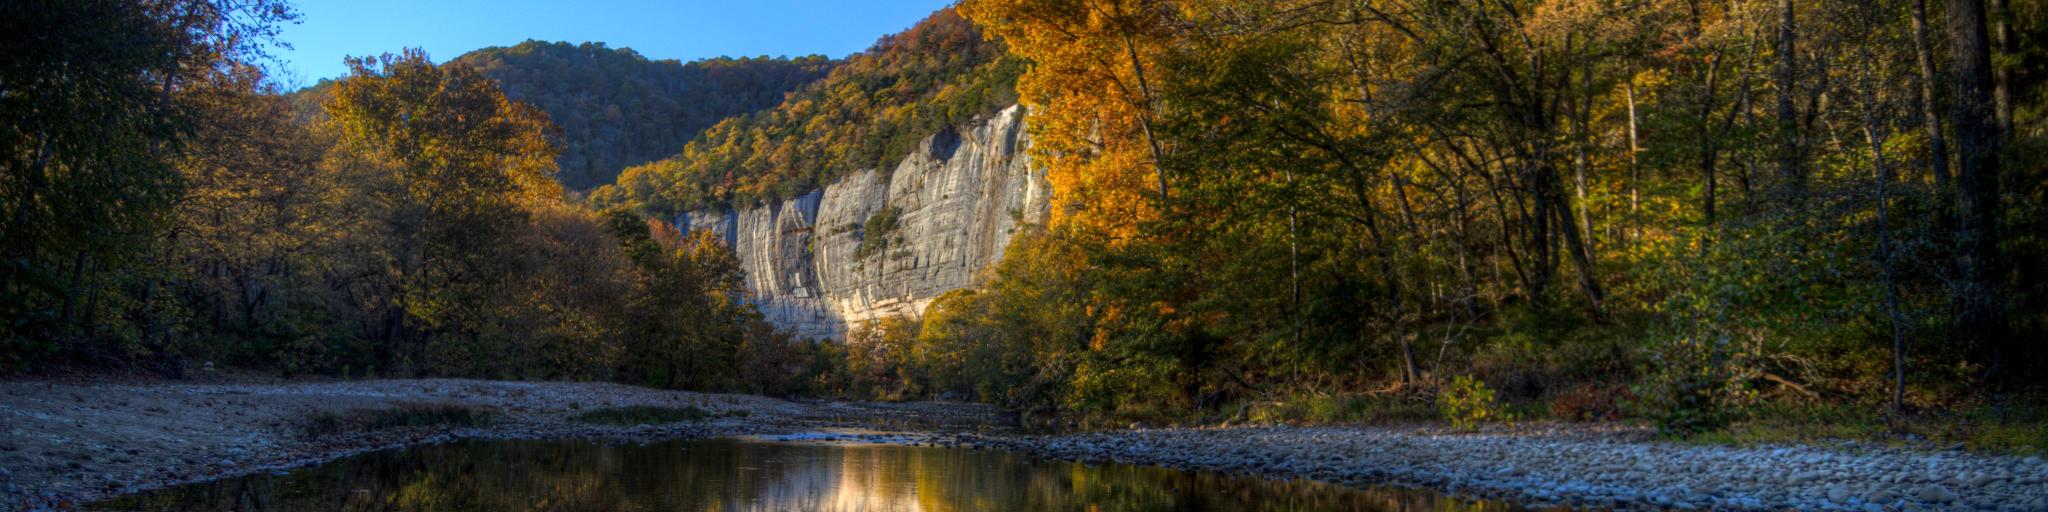 Sunset photo during the autumn as the trees change color at Roark Bluff in Steel Creek Campground along the Buffalo River located in the Ozark Mountains, Arkansas, USA.